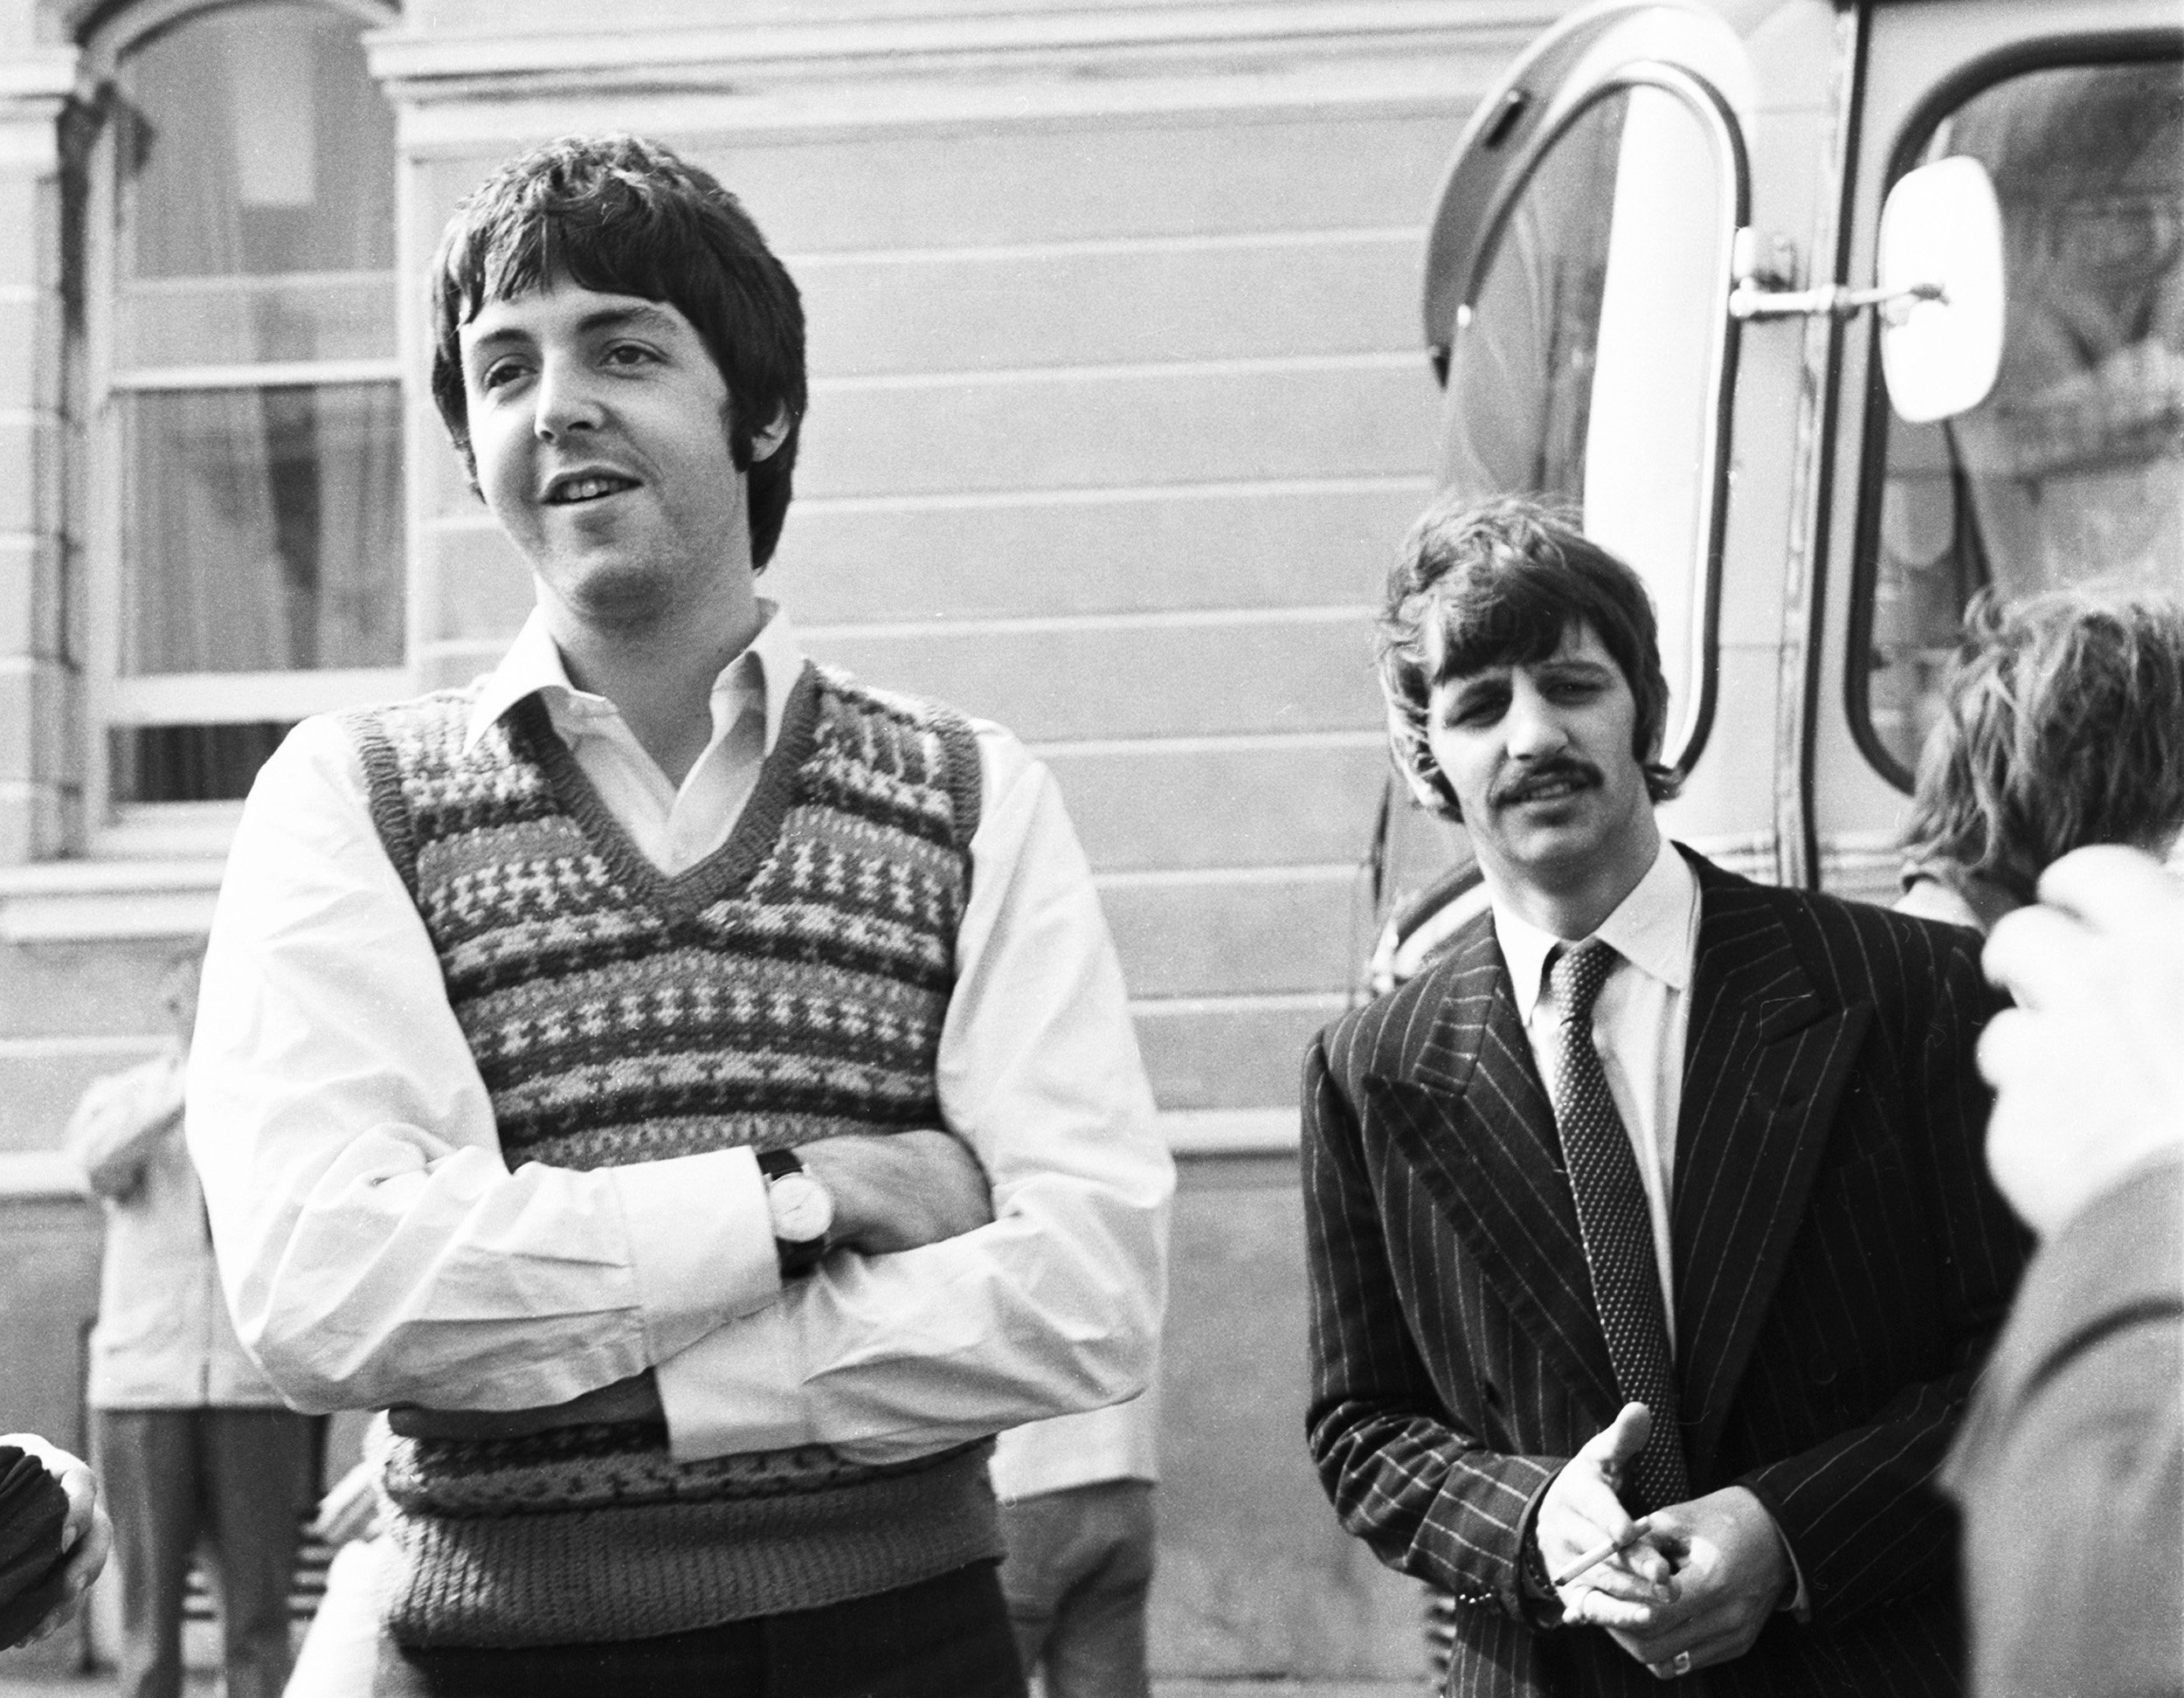 Paul McCartney and Ringo Starr on the Magical Mystery Tour